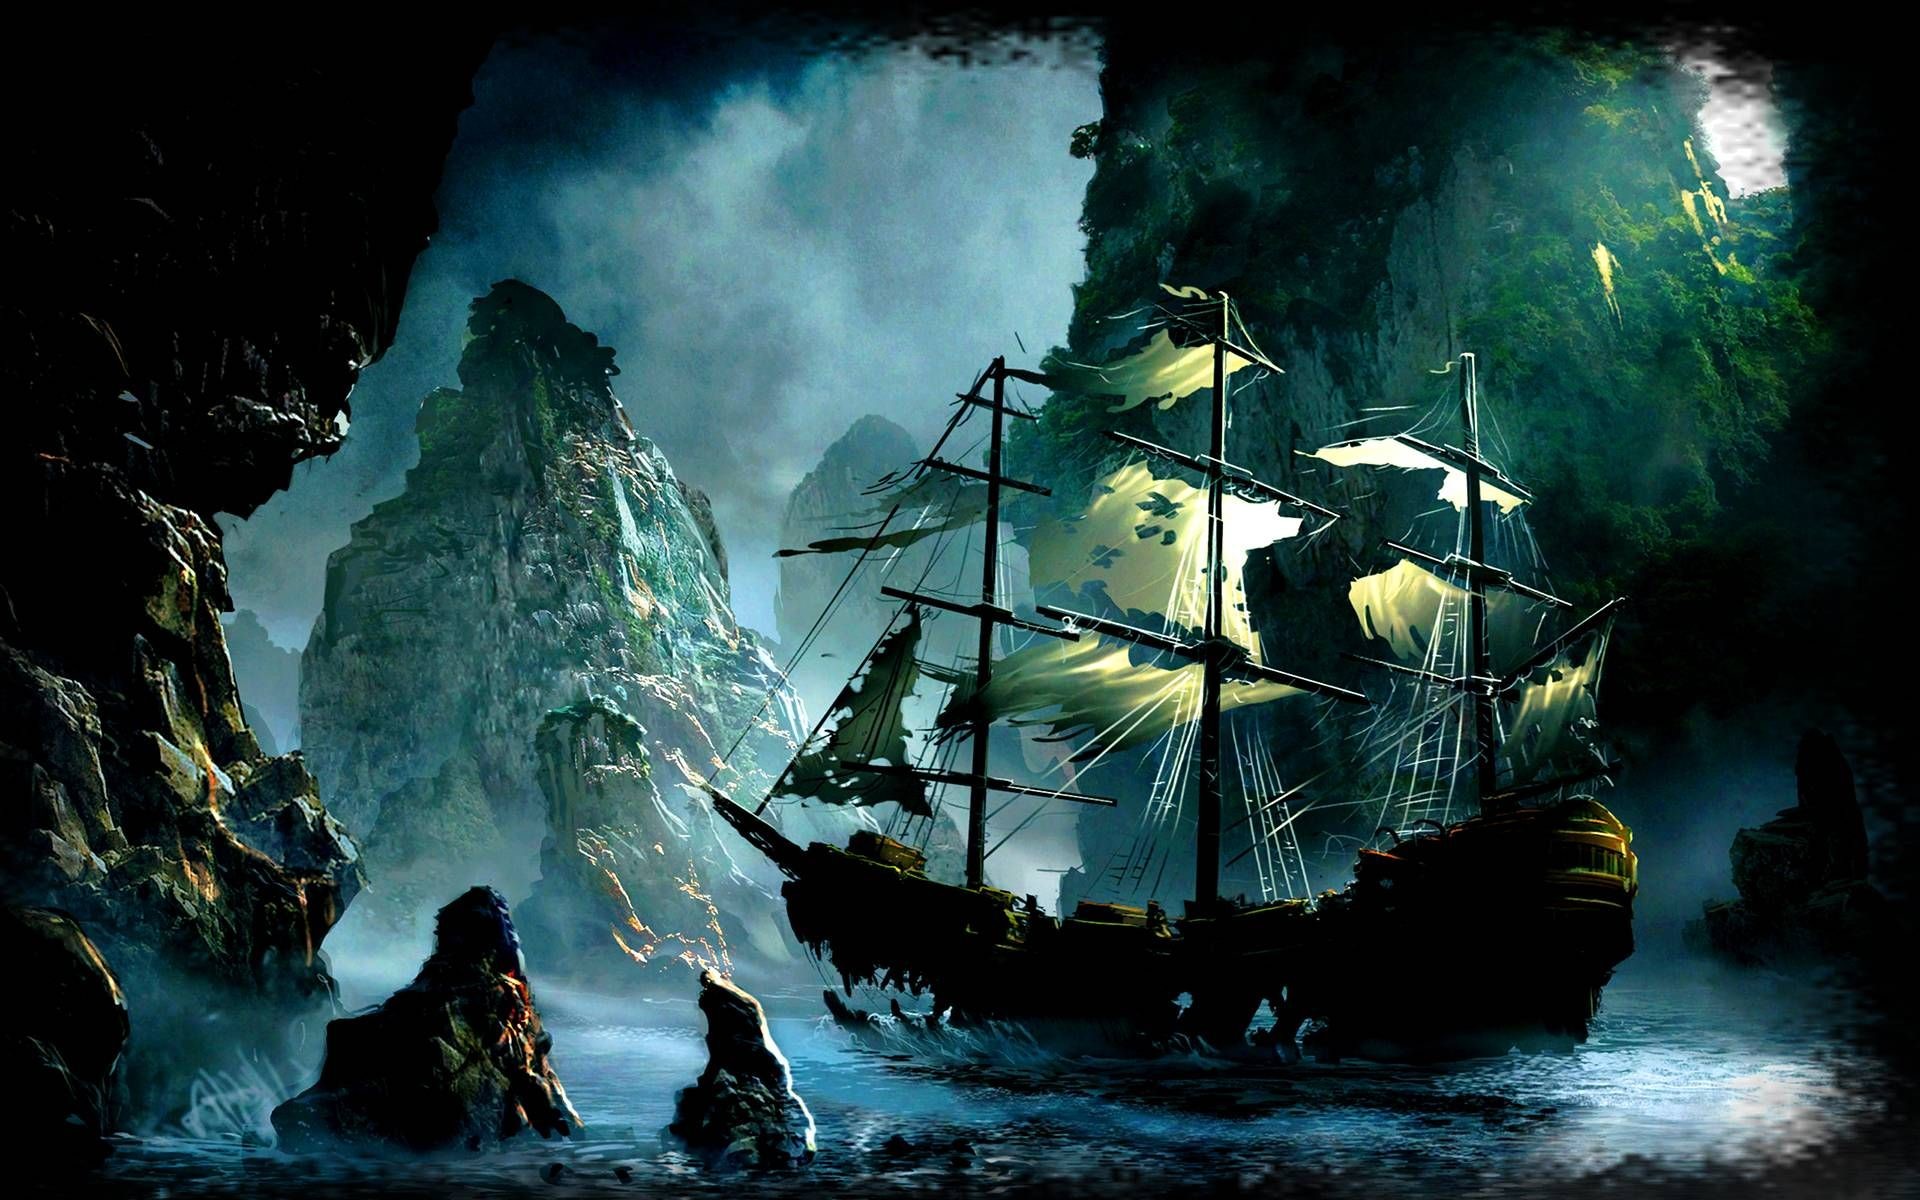 1920x1200, Ghost Pirate Ship Backgrounds For Desktop - Pirate Ship In Cave - HD Wallpaper 